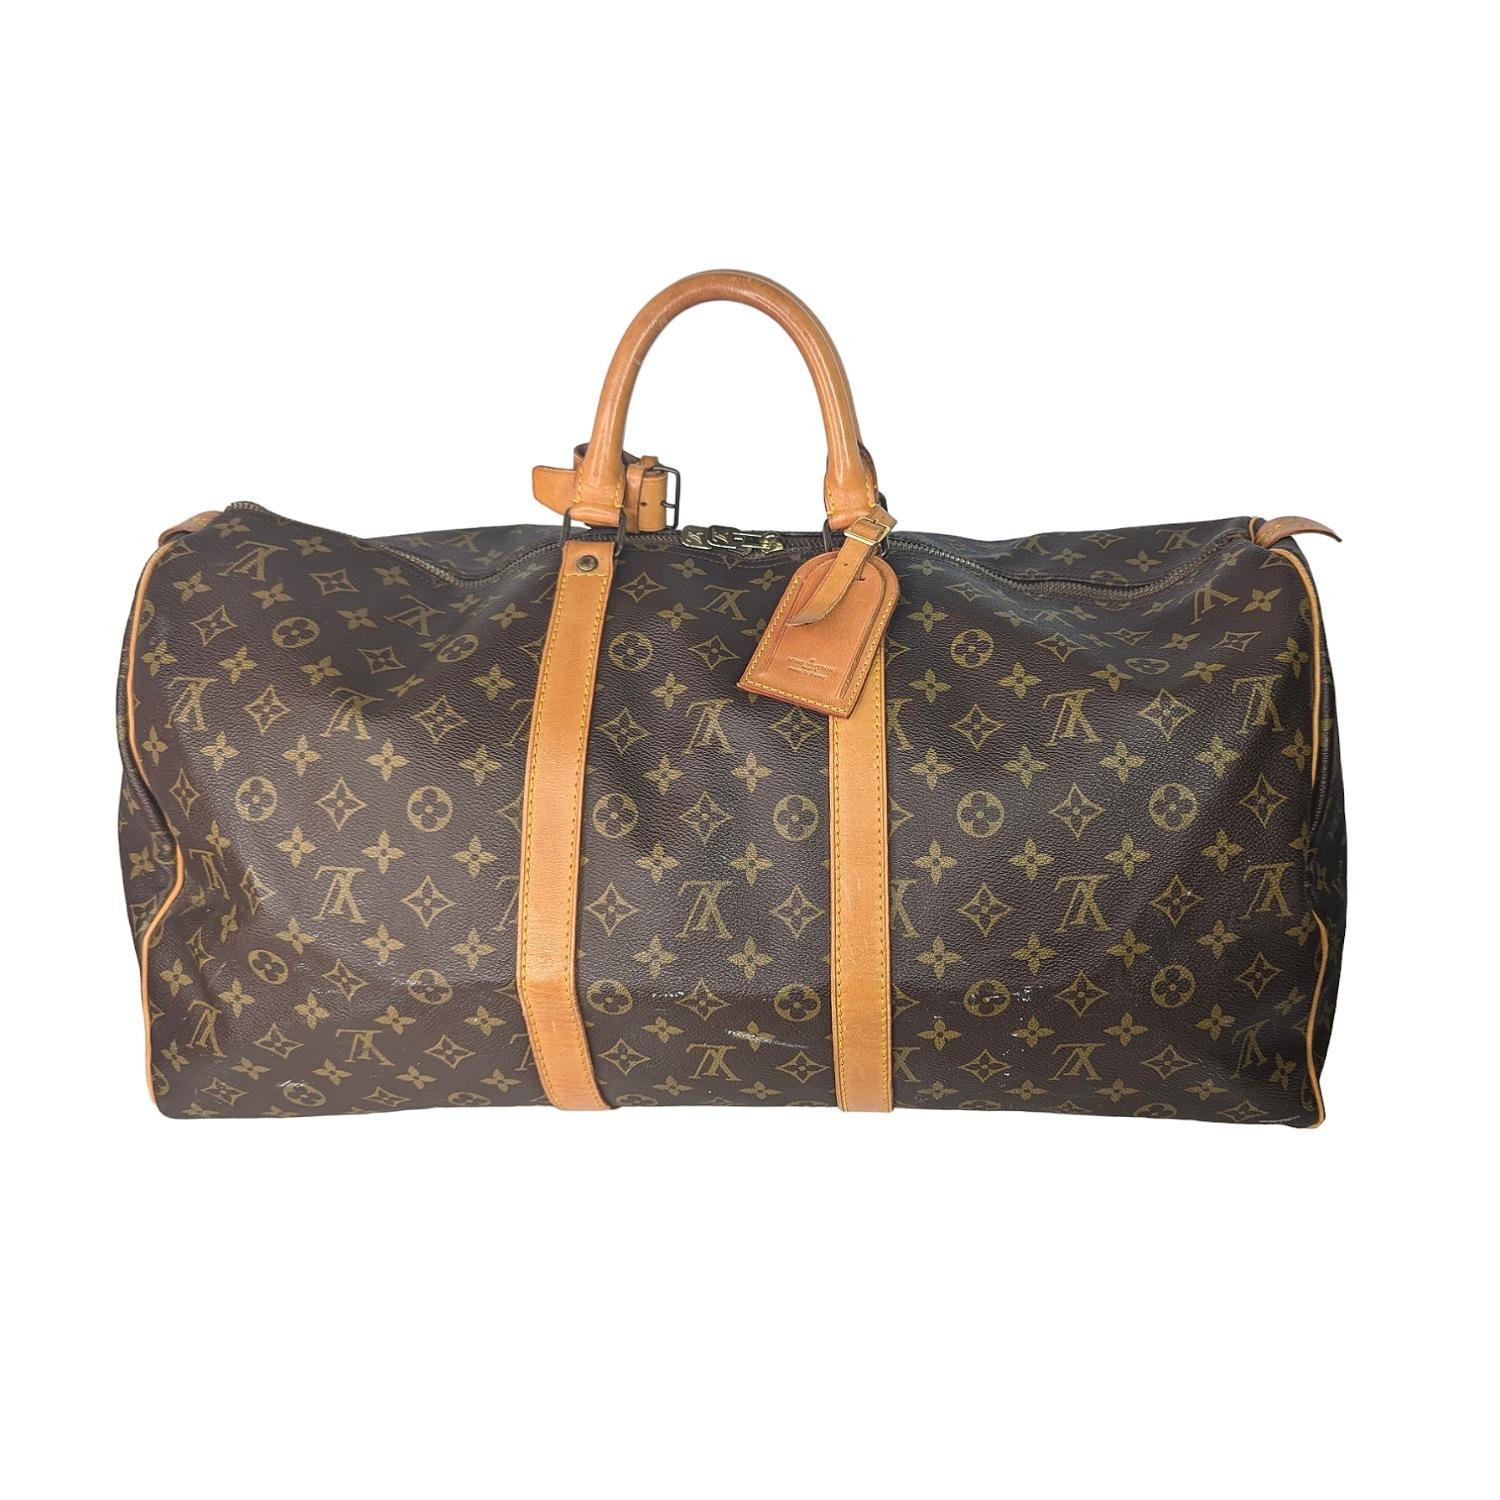 Louis Vuitton 1984 Monogram Canvas Keepall 55 Bag In Good Condition For Sale In Scottsdale, AZ